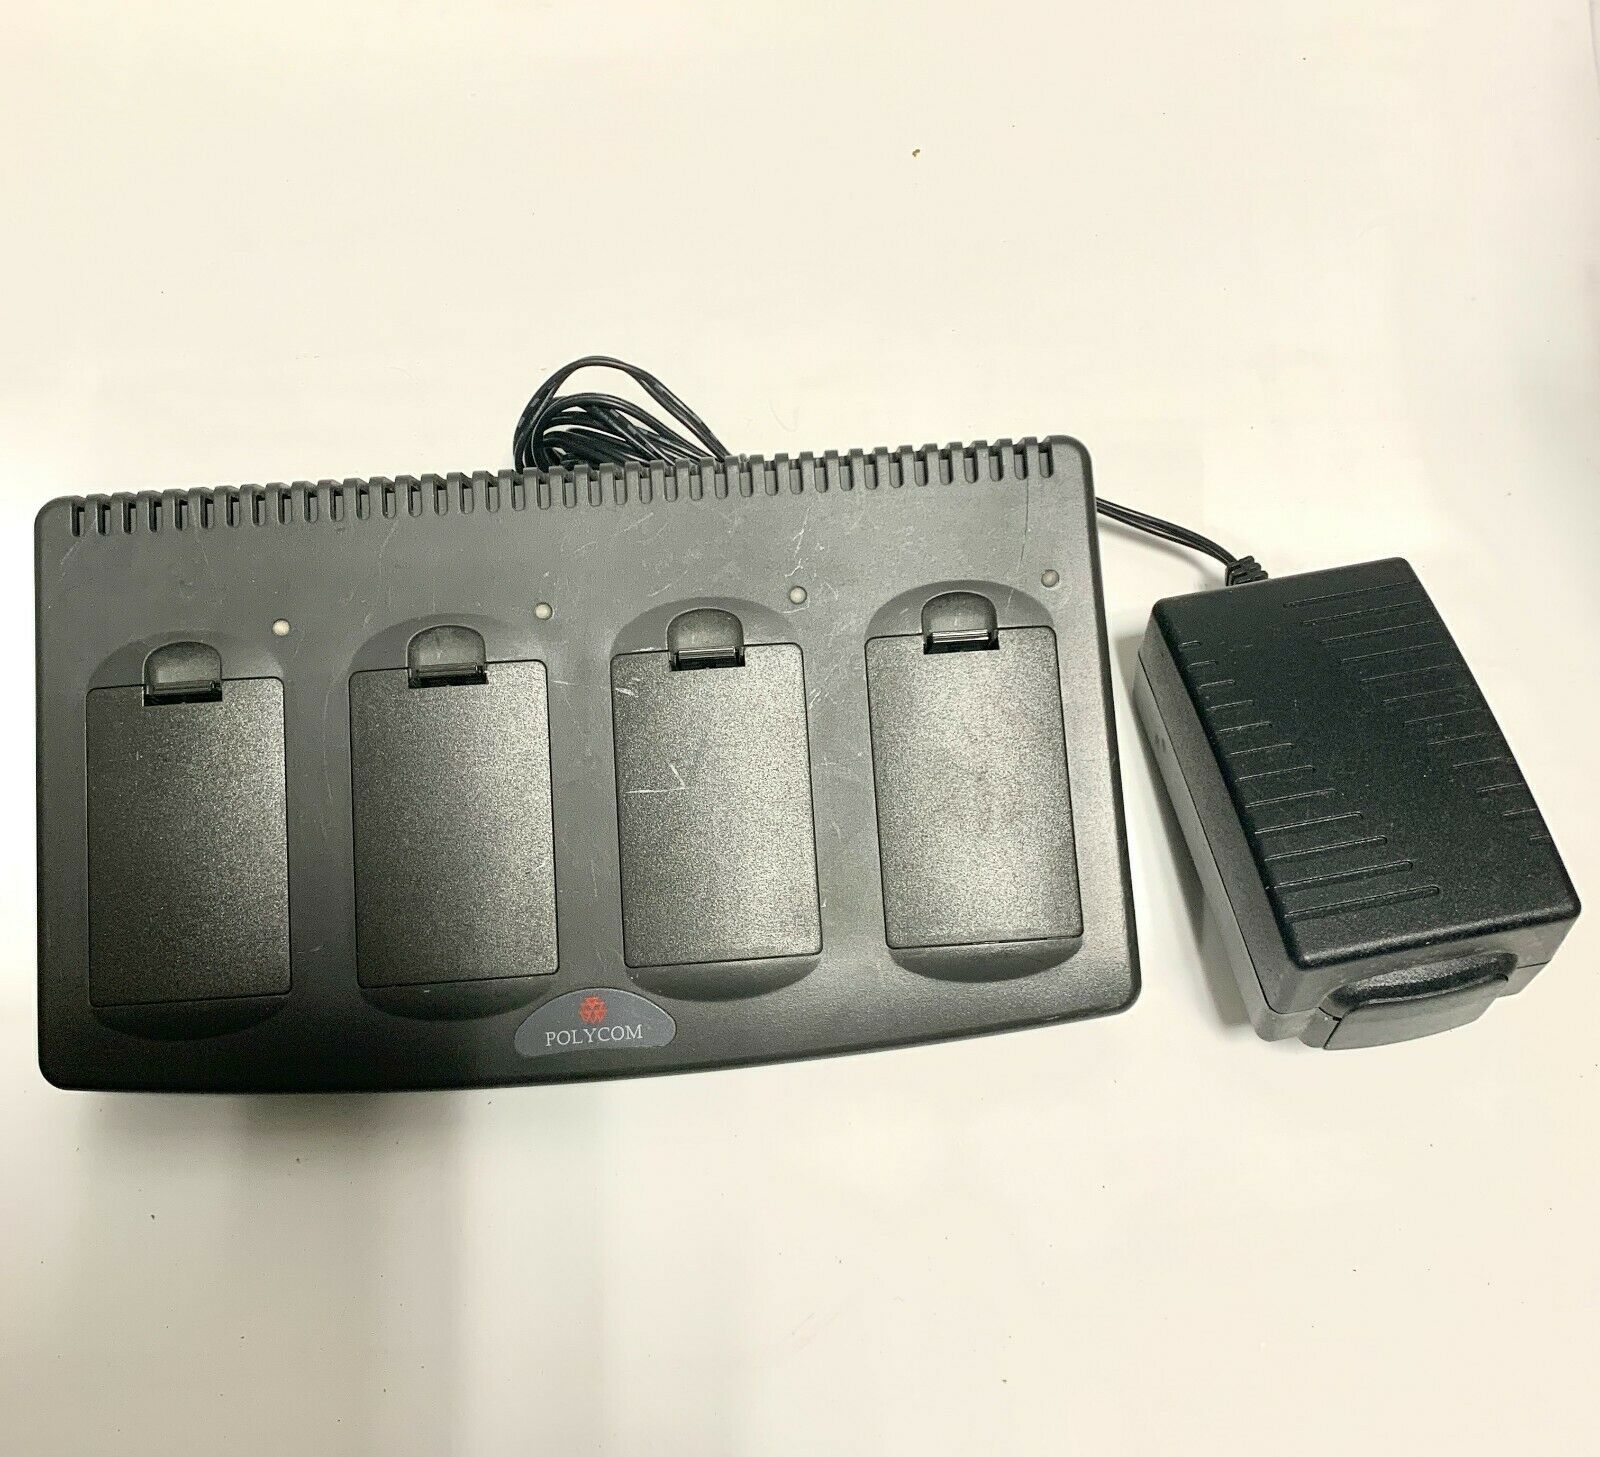 Polycom Spectralink quad battery charger gcq100 with 4 batteries - $125.00